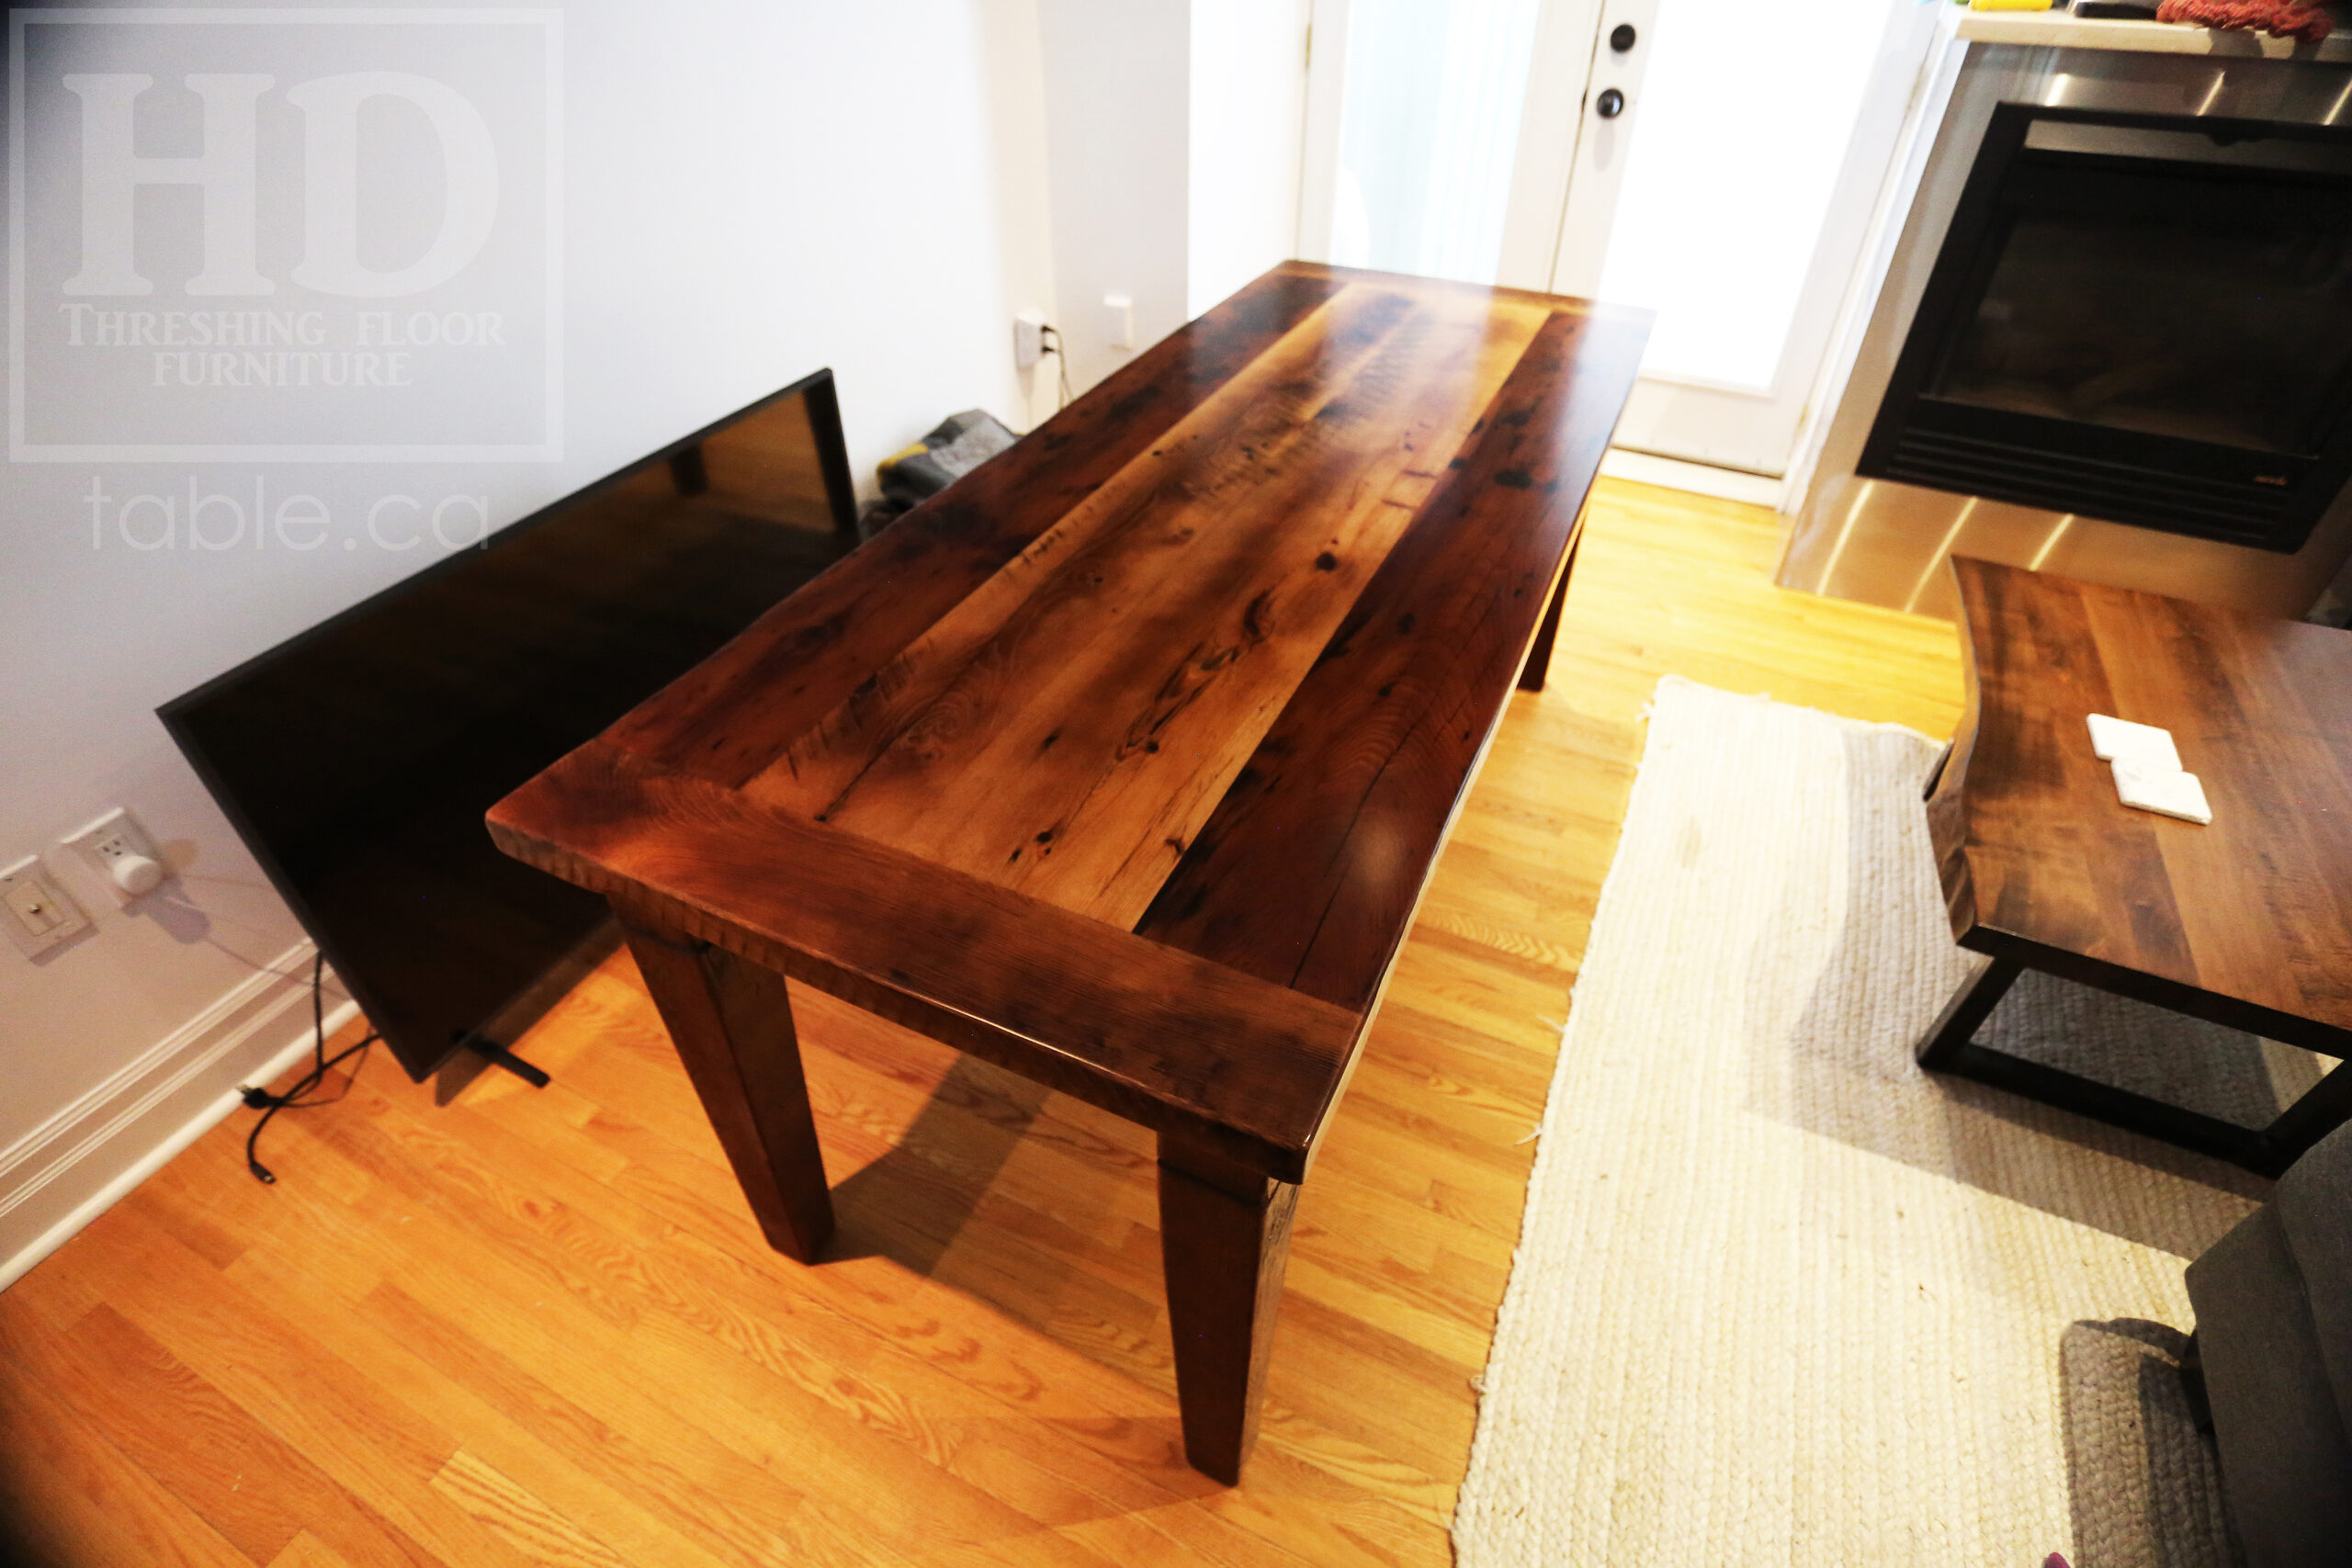 6’ Ontario Barnwood Harvest Table we made for a Toronto, Ontario Home – 28” wide – Harvest Base / Tapered with a Notch Windbrace Beam Legs - Old Growth Hemlock Threshing Floor Construction - Original edges & distressing maintained – Bread Edge Board Ends – Premium epoxy + satin polyurethane finish - www.table.ca